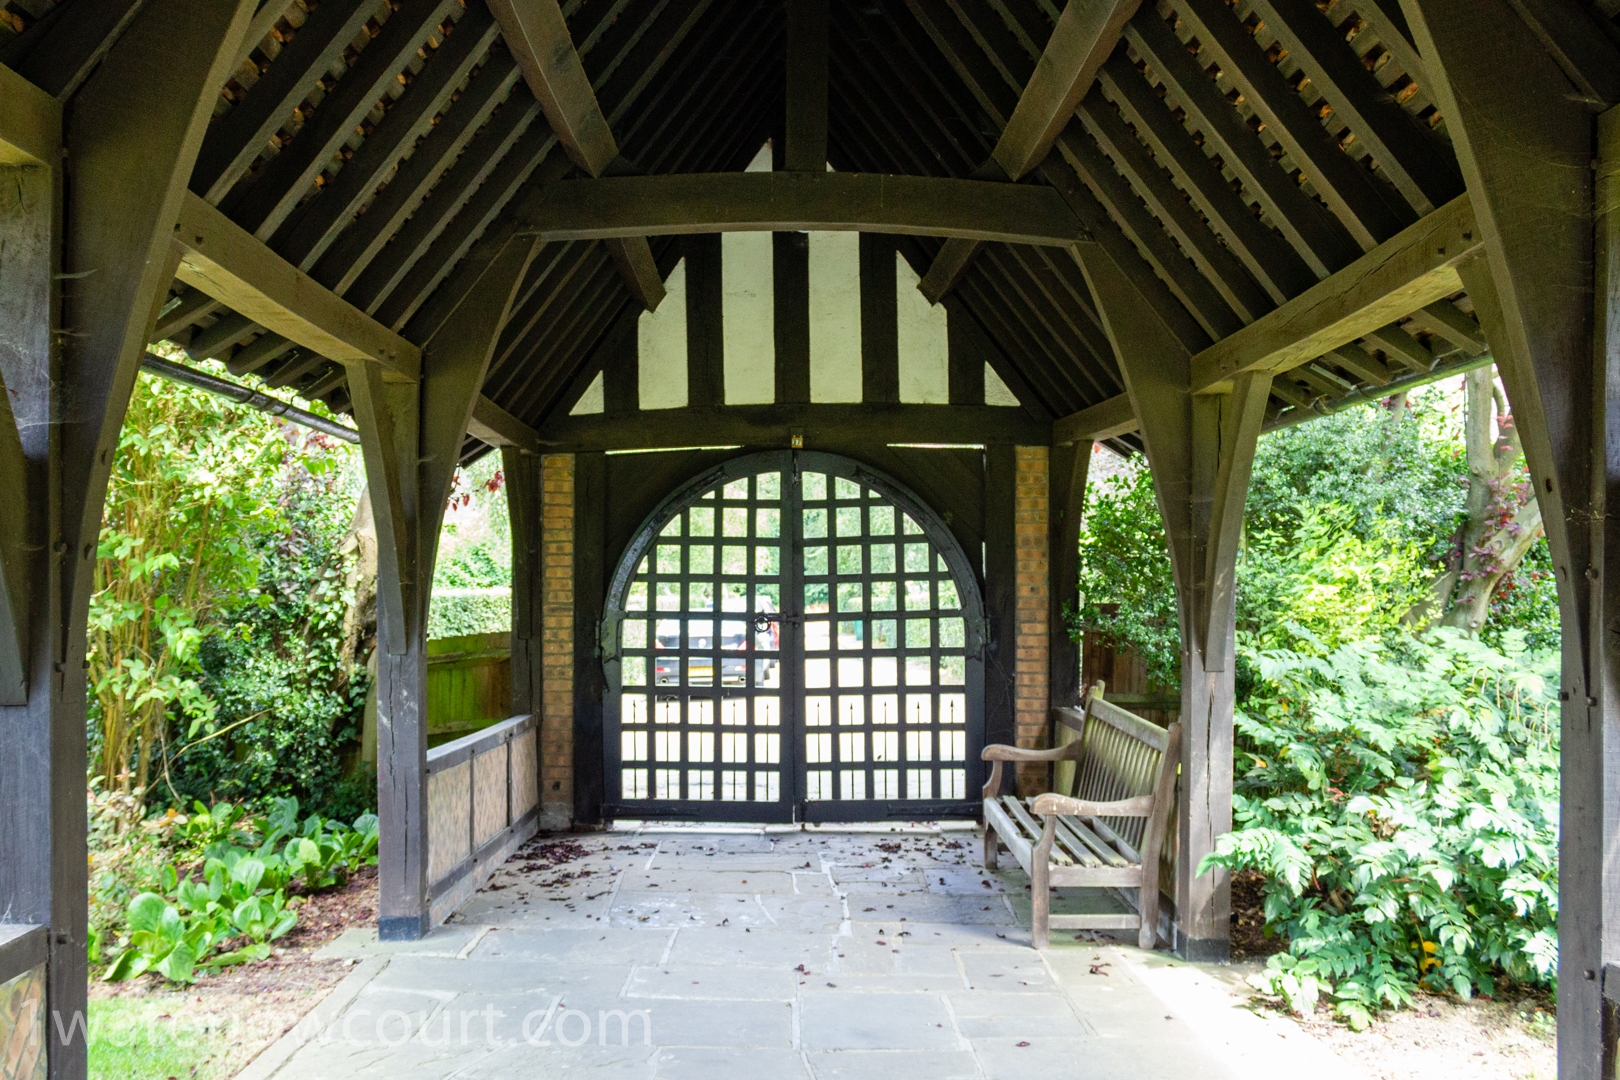 The covered walkway that leads to the timber-framed gate at the entrance of Waterlow Court. Waterlow Court is an Arts & Crafts Grade II* listed building, designed by M. H. Baillie Scott, 1909, located in Hampstead Garden Suburb, London NW11 7DT. Flat 1, a one-bedroom, ground-floor flat, is for sale. Listed on Rightmove and Zoopla.